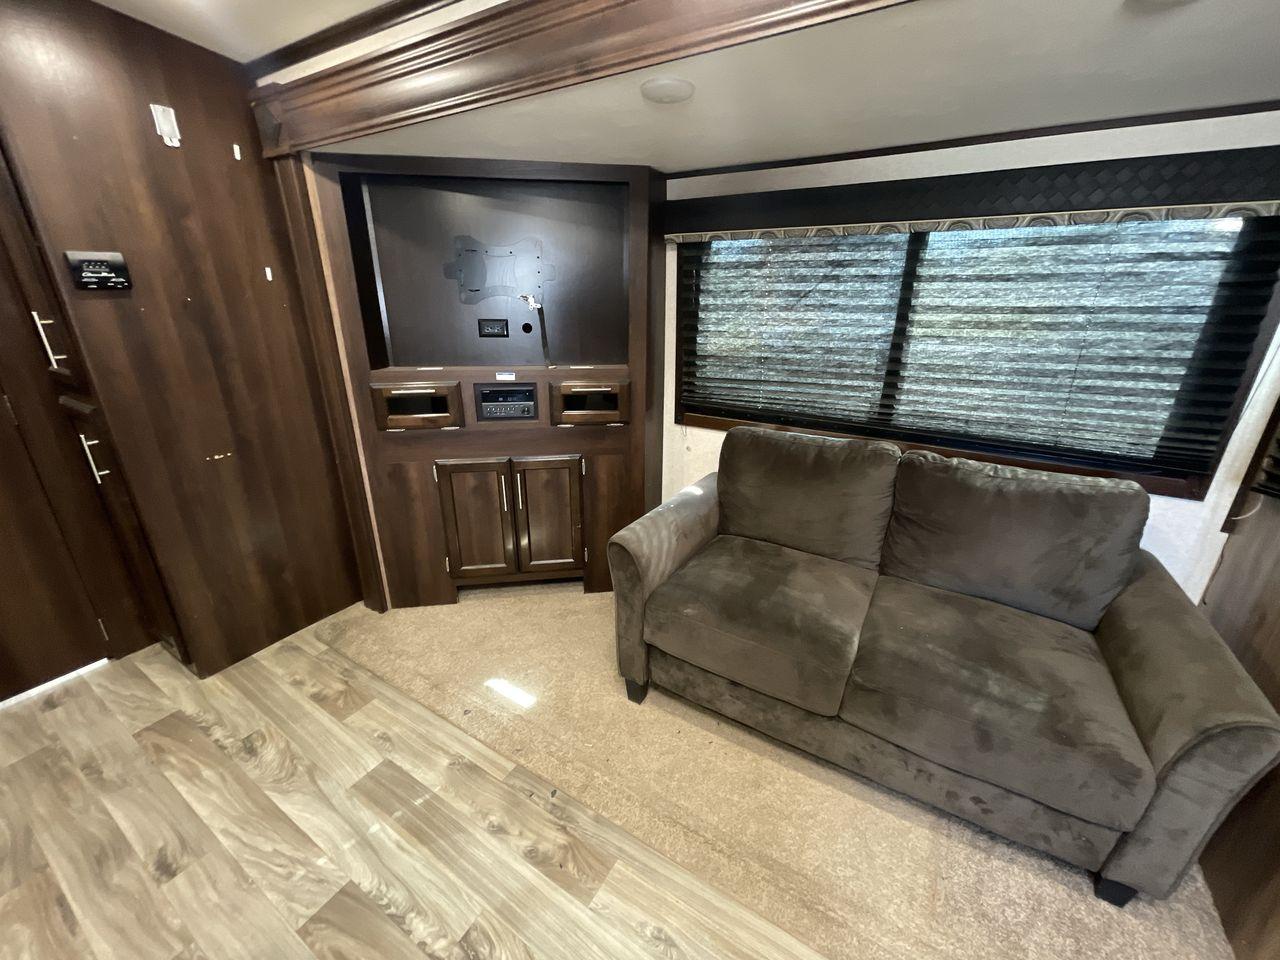 2018 WHITE JAYCO JAY FLIGHT 23MRB (1UJBJ0BN5J1) , Length: 28.17 ft | Dry Weight: 5,560 lbs. | Gross Weight: 7,250 lbs. | Slides: 1 transmission, located at 4319 N Main St, Cleburne, TX, 76033, (817) 678-5133, 32.385960, -97.391212 - The 2018 Jayco Jay Flight 23MRB is a travel trailer that encapsulates both compactness and luxury for unparalleled camping experiences. Spanning 28 feet in length, this model boasts a thoughtfully arranged interior featuring a single slide-out, seamlessly amplifying the living space. The Jay Flight - Photo #12